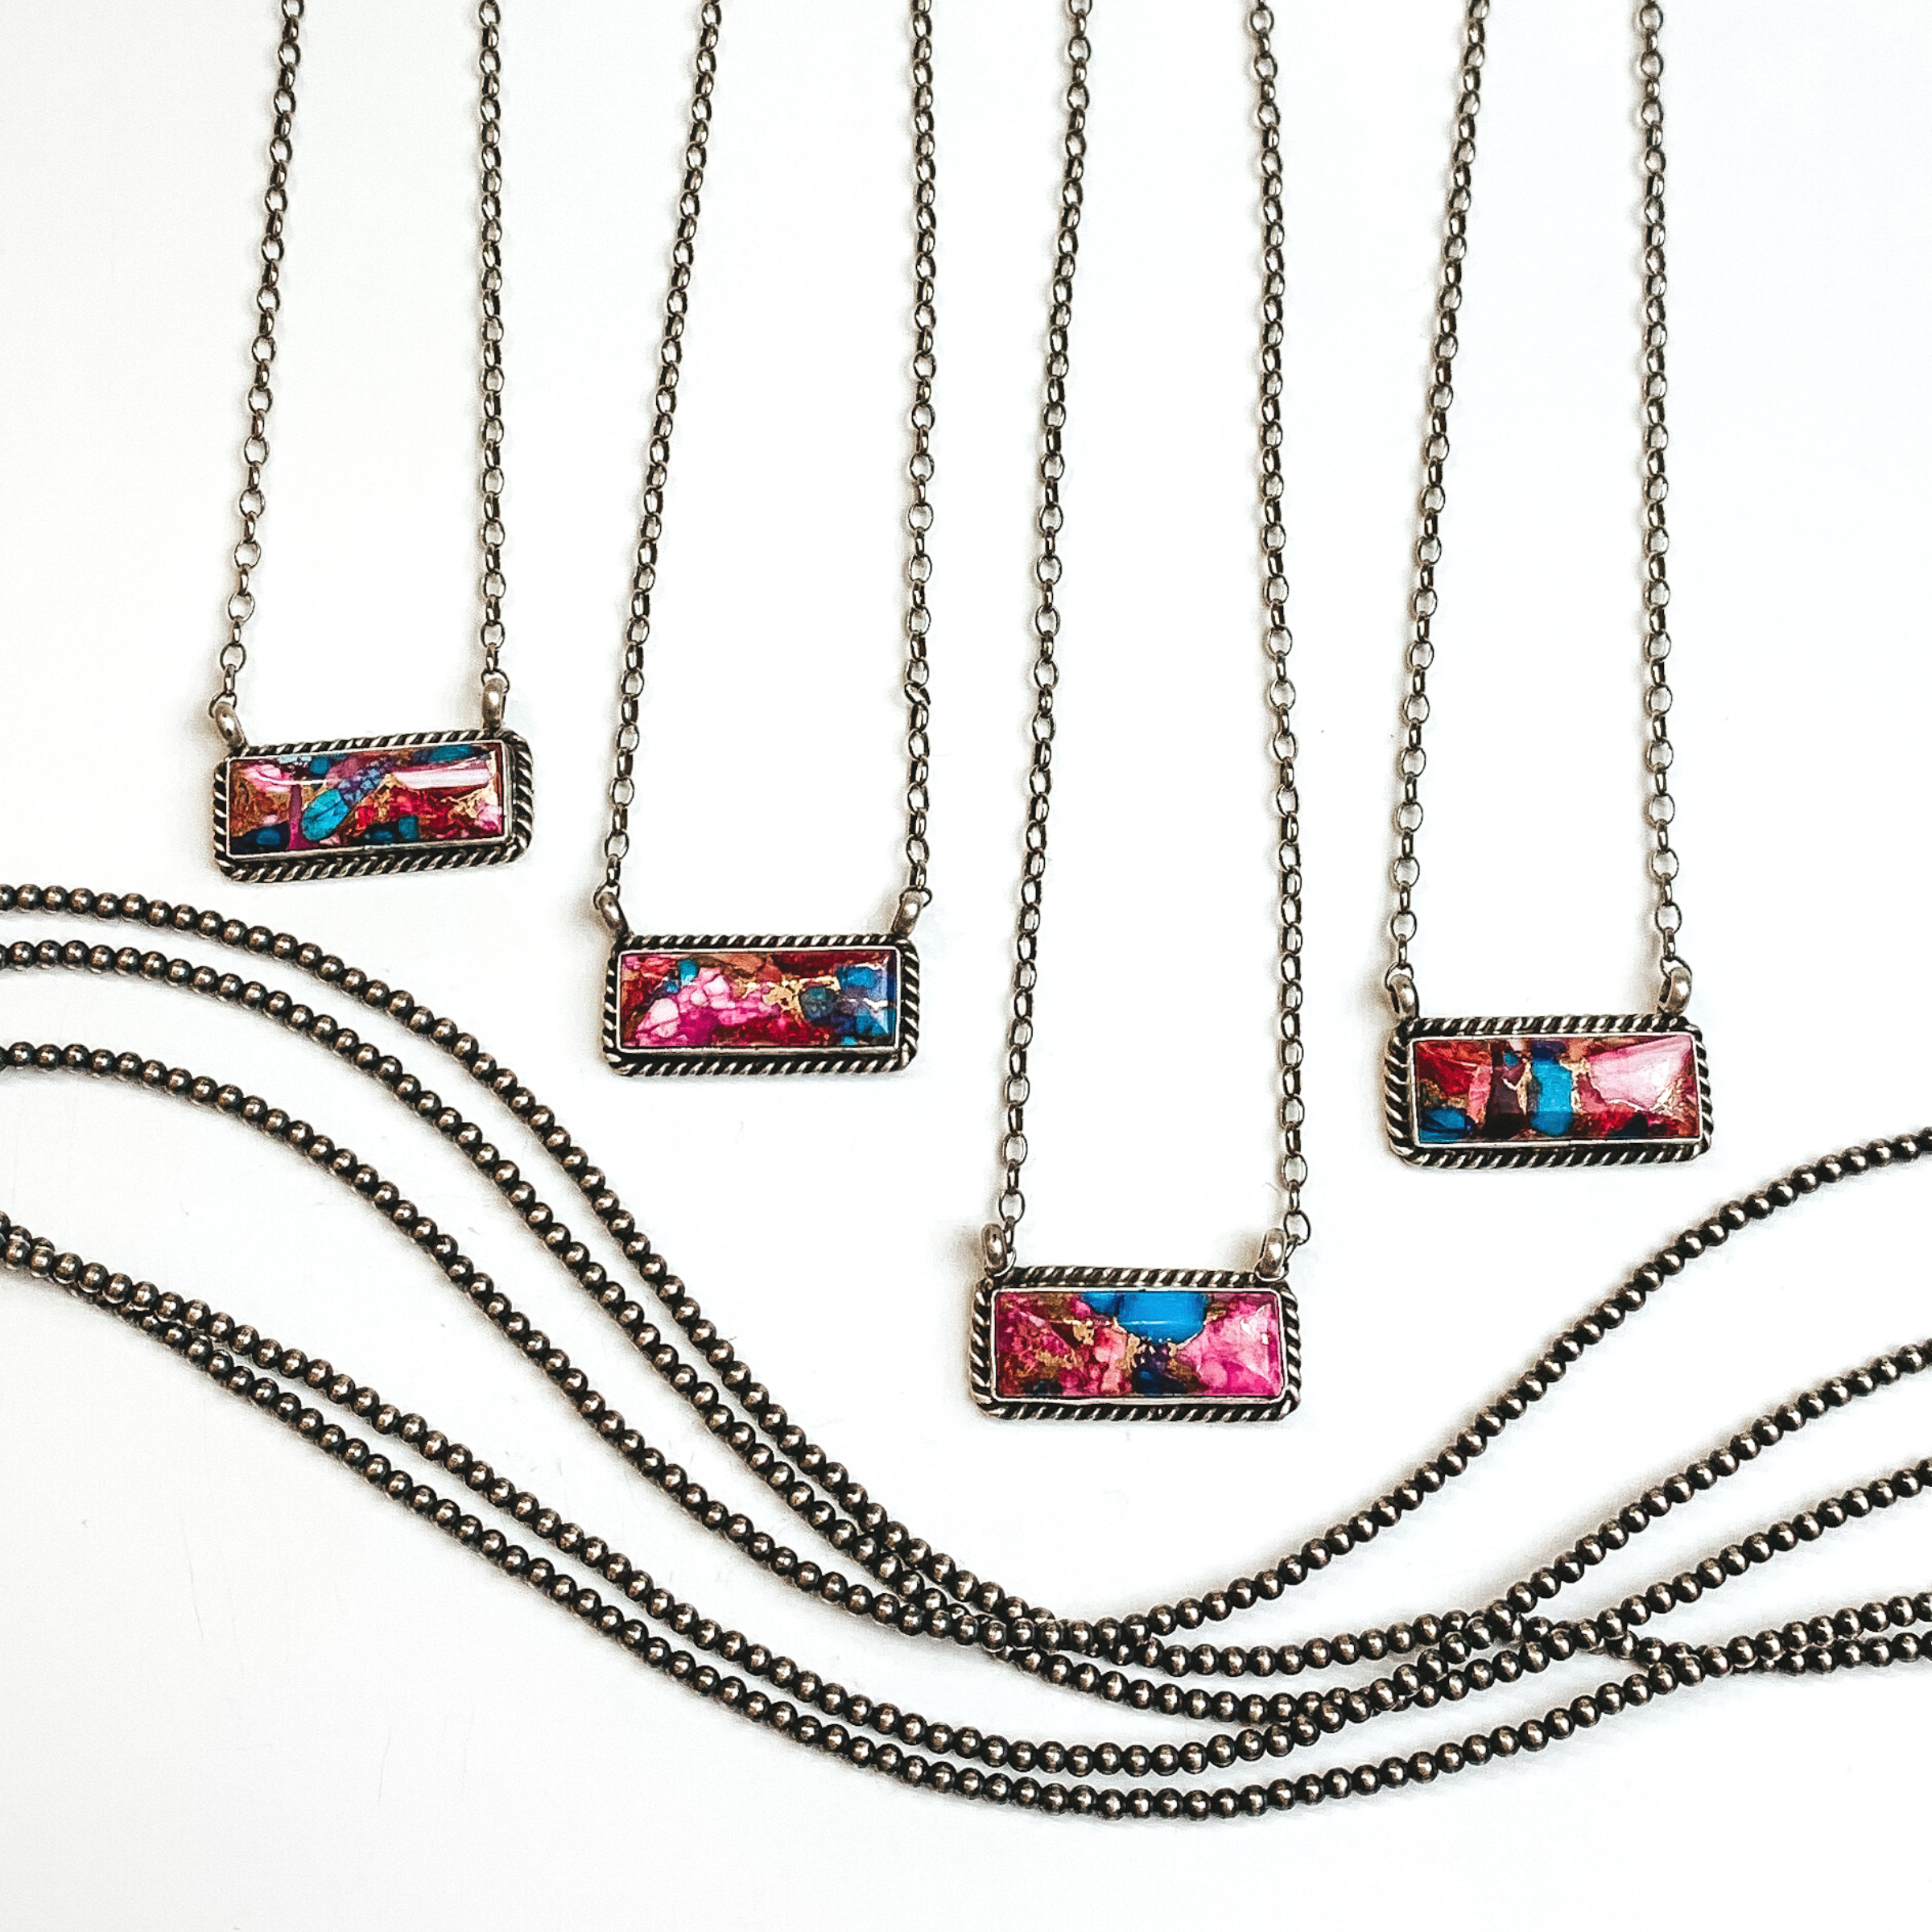 Four silver chain necklaces with rectangle bars that have a pink mojave and turquoise remix stone. These necklaces are pictured on a white background with silver beads under the necklaces. 